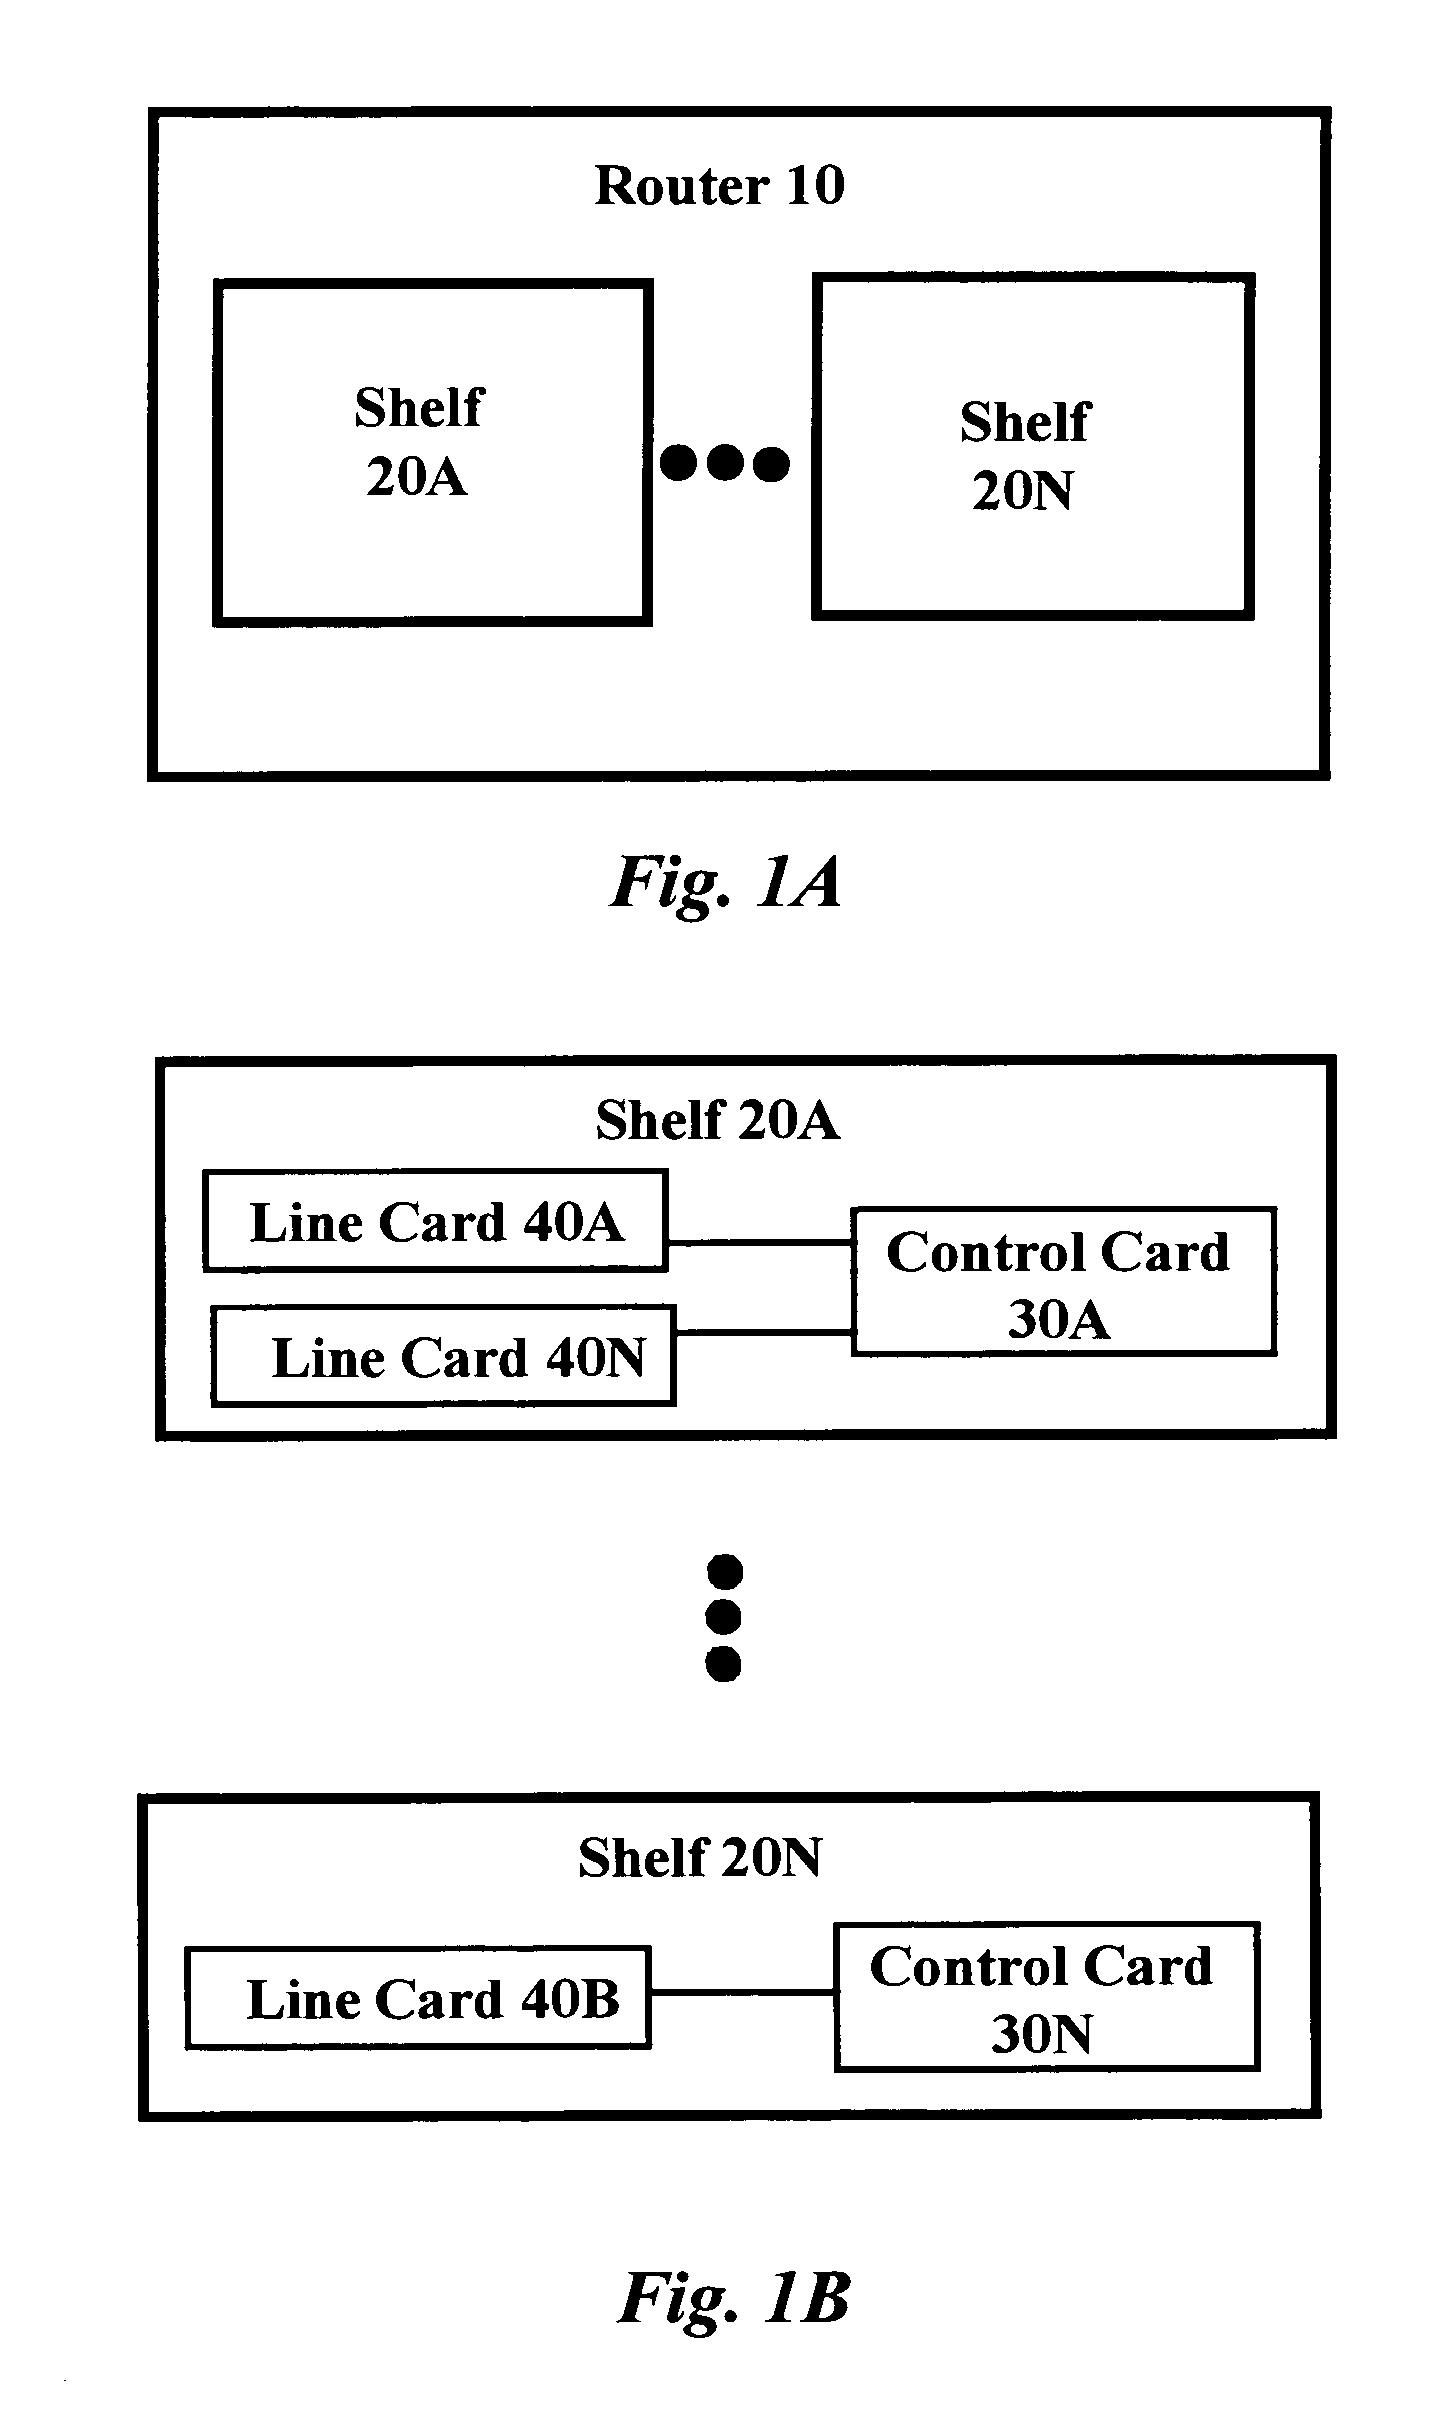 Methods and apparatus for synchronizing and propagating distributed routing databases